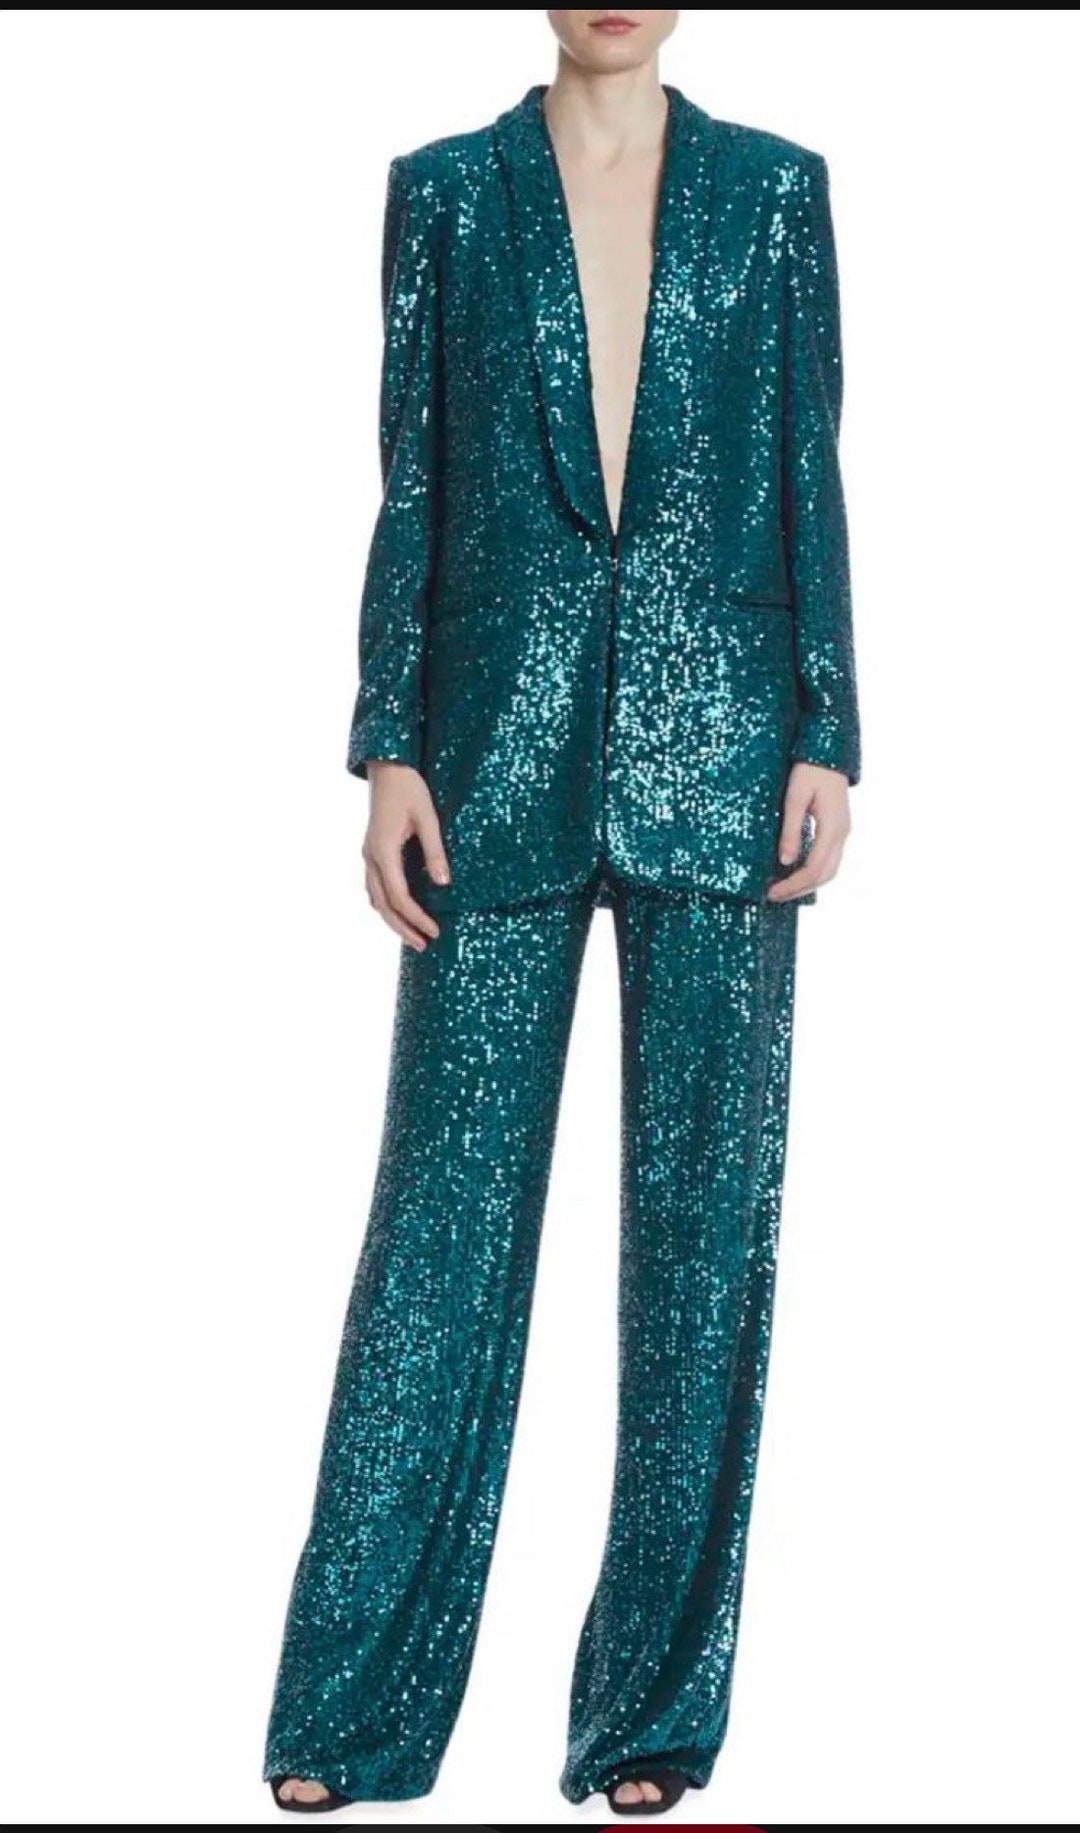 Silver Shiny Sequin Pantsuit, Designer Woman Suit Jacket Shorts, Suit Set  for Smart Casual/ Formal/ Party/ Gift for Her - Etsy Australia | Suits for  women, Suit jackets for women, Fashion